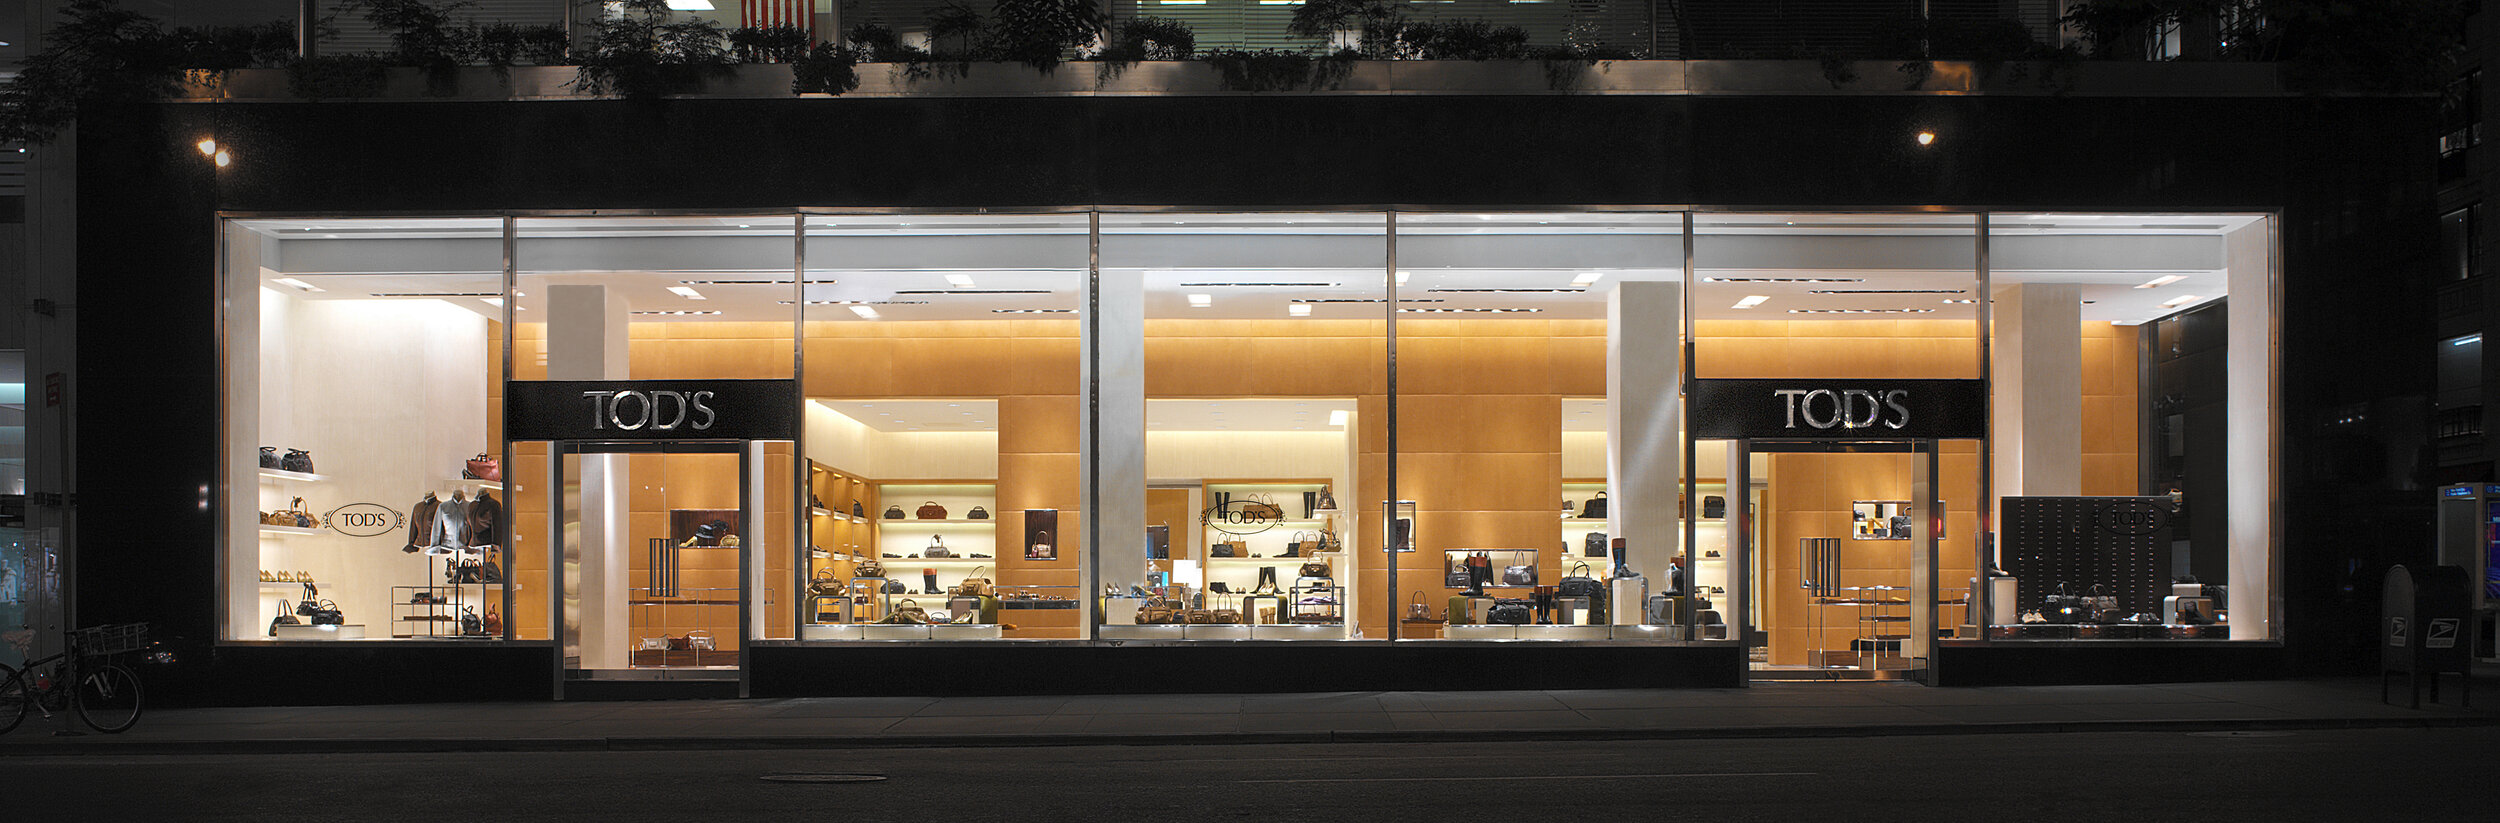  Tod's New York - Exterior Elevation 